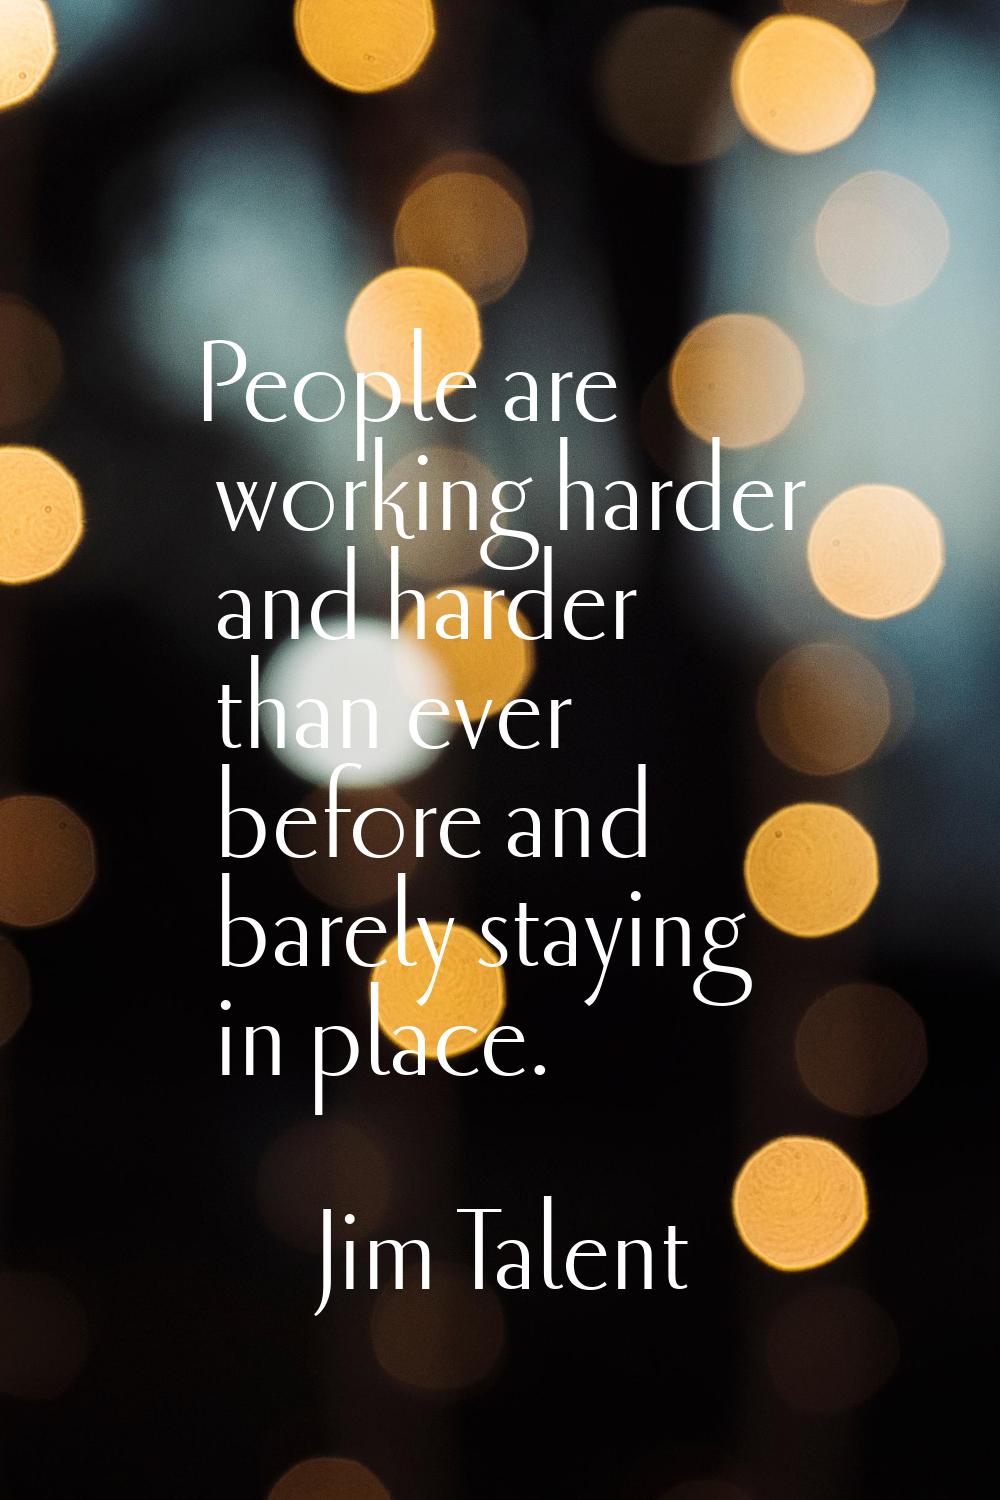 People are working harder and harder than ever before and barely staying in place.